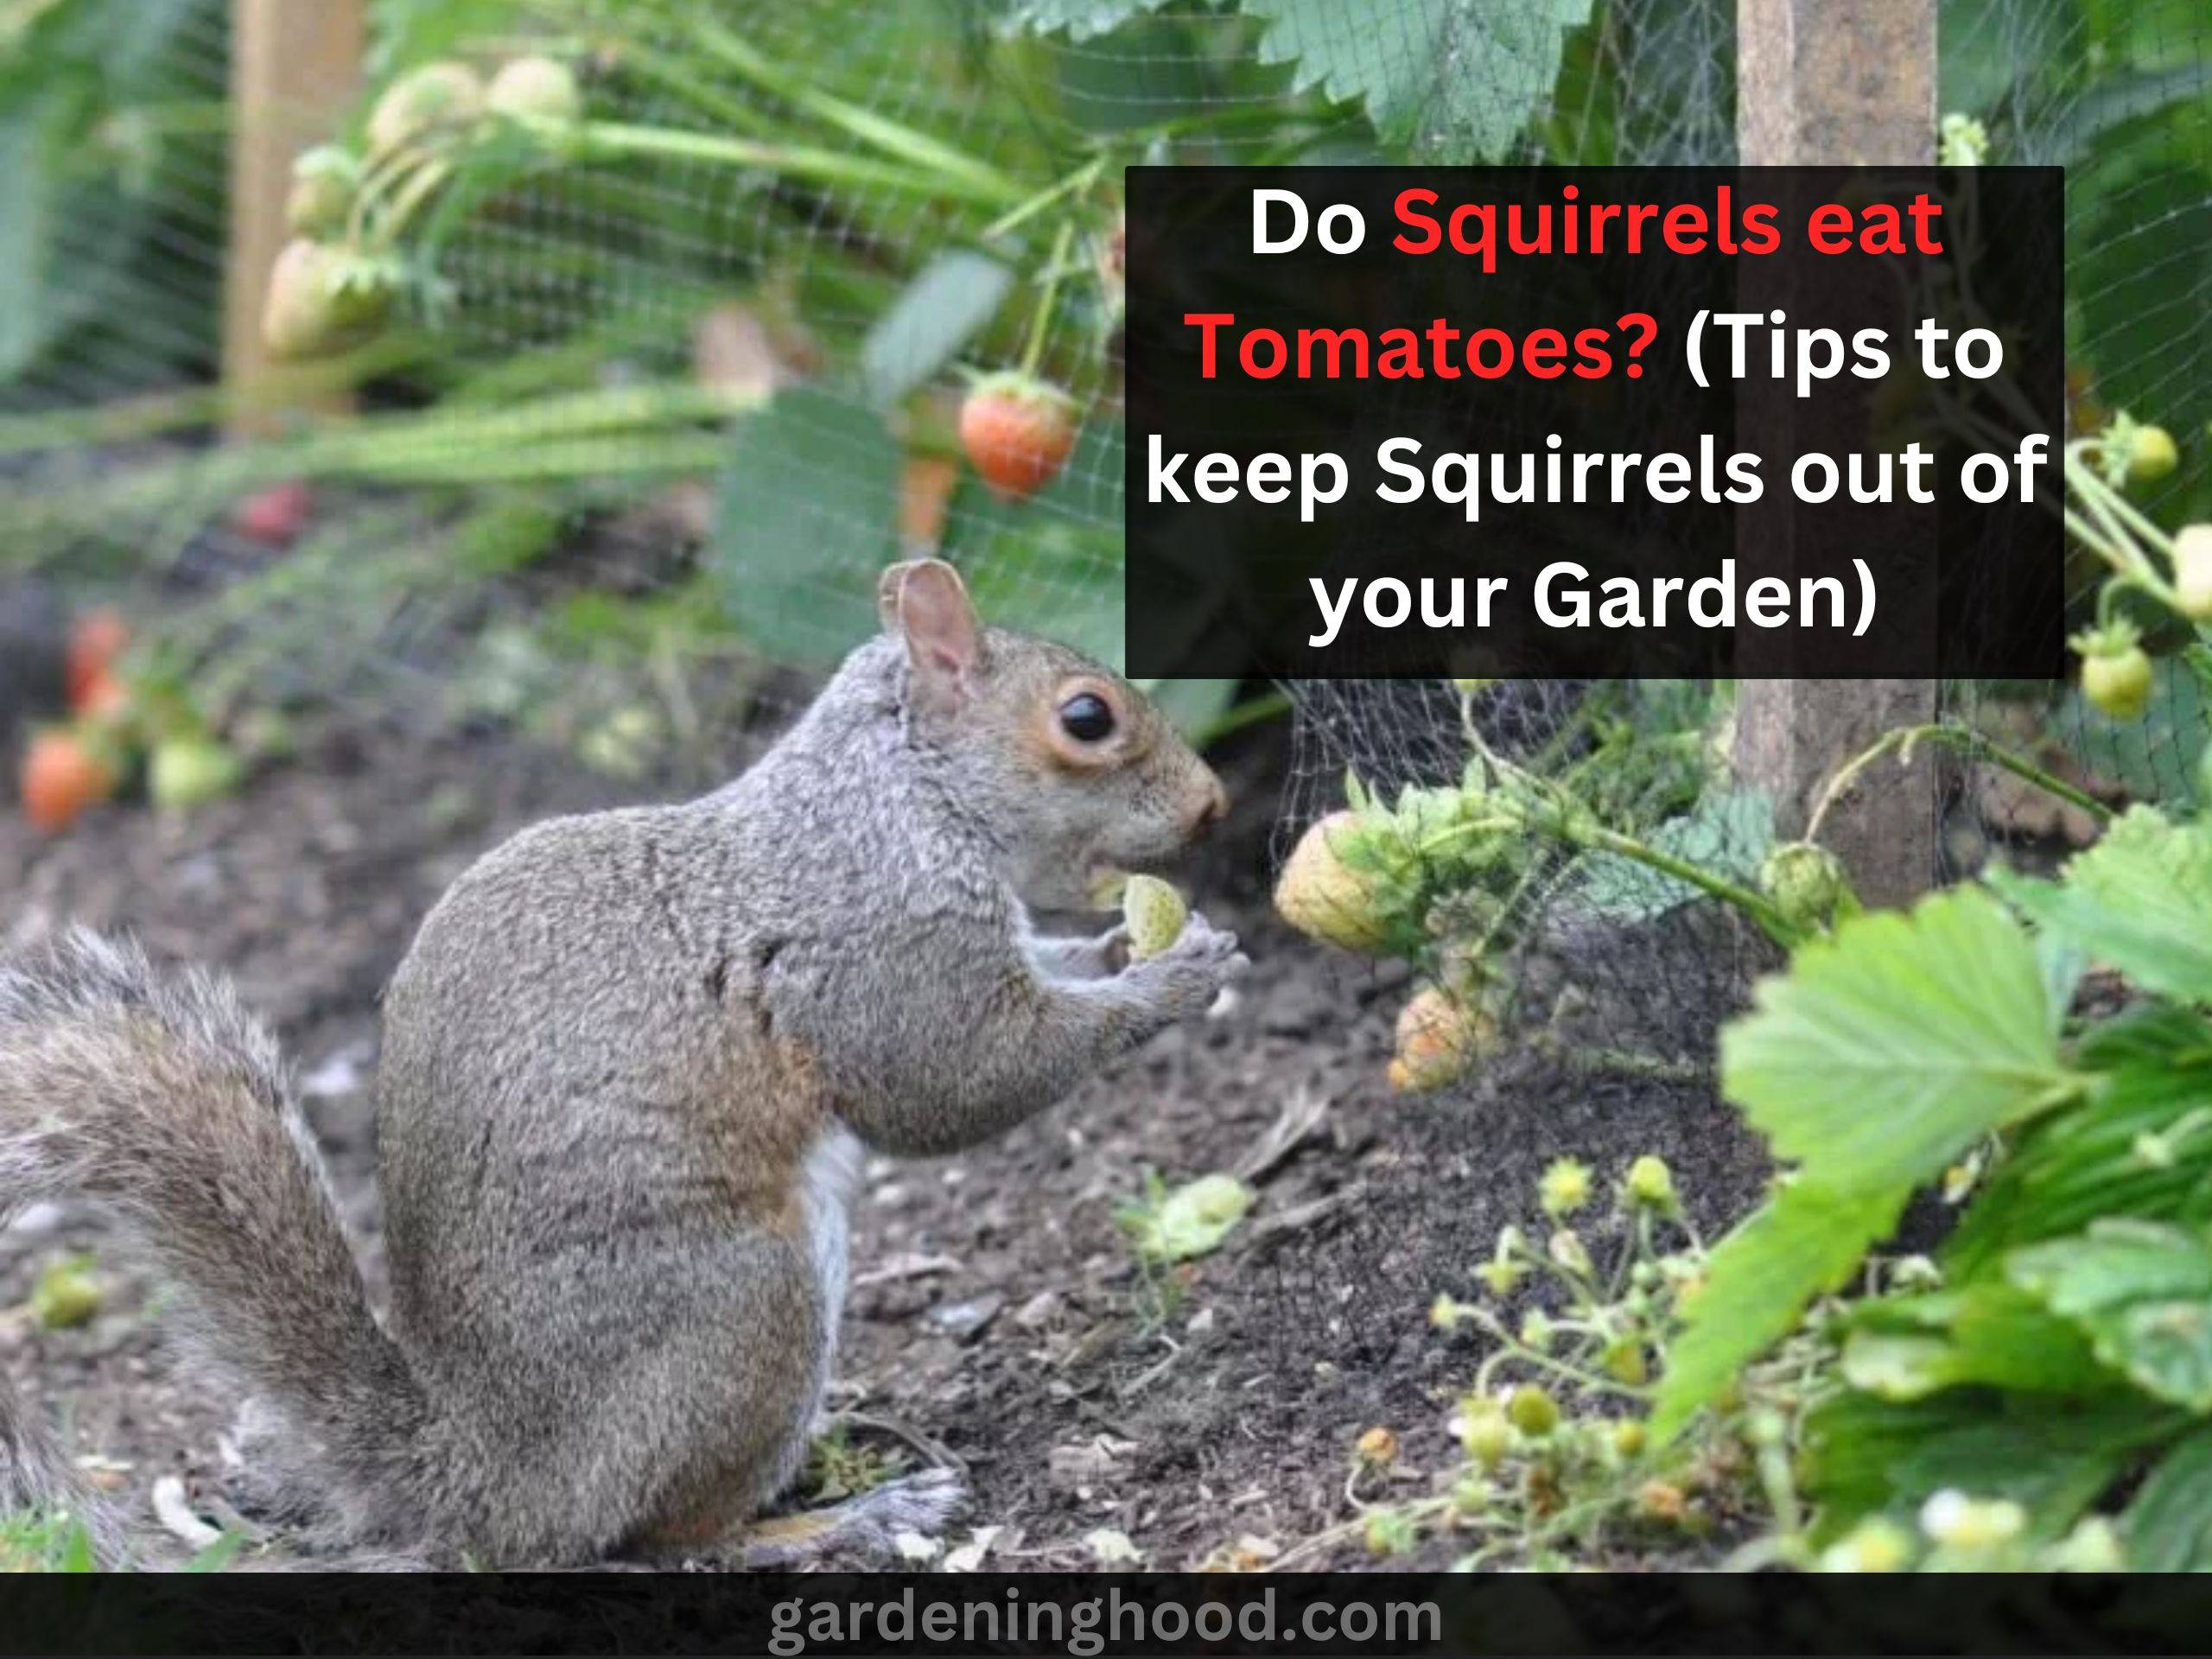 Do Squirrels eat Tomatoes? (Tips to keep Squirrels out of your Garden)